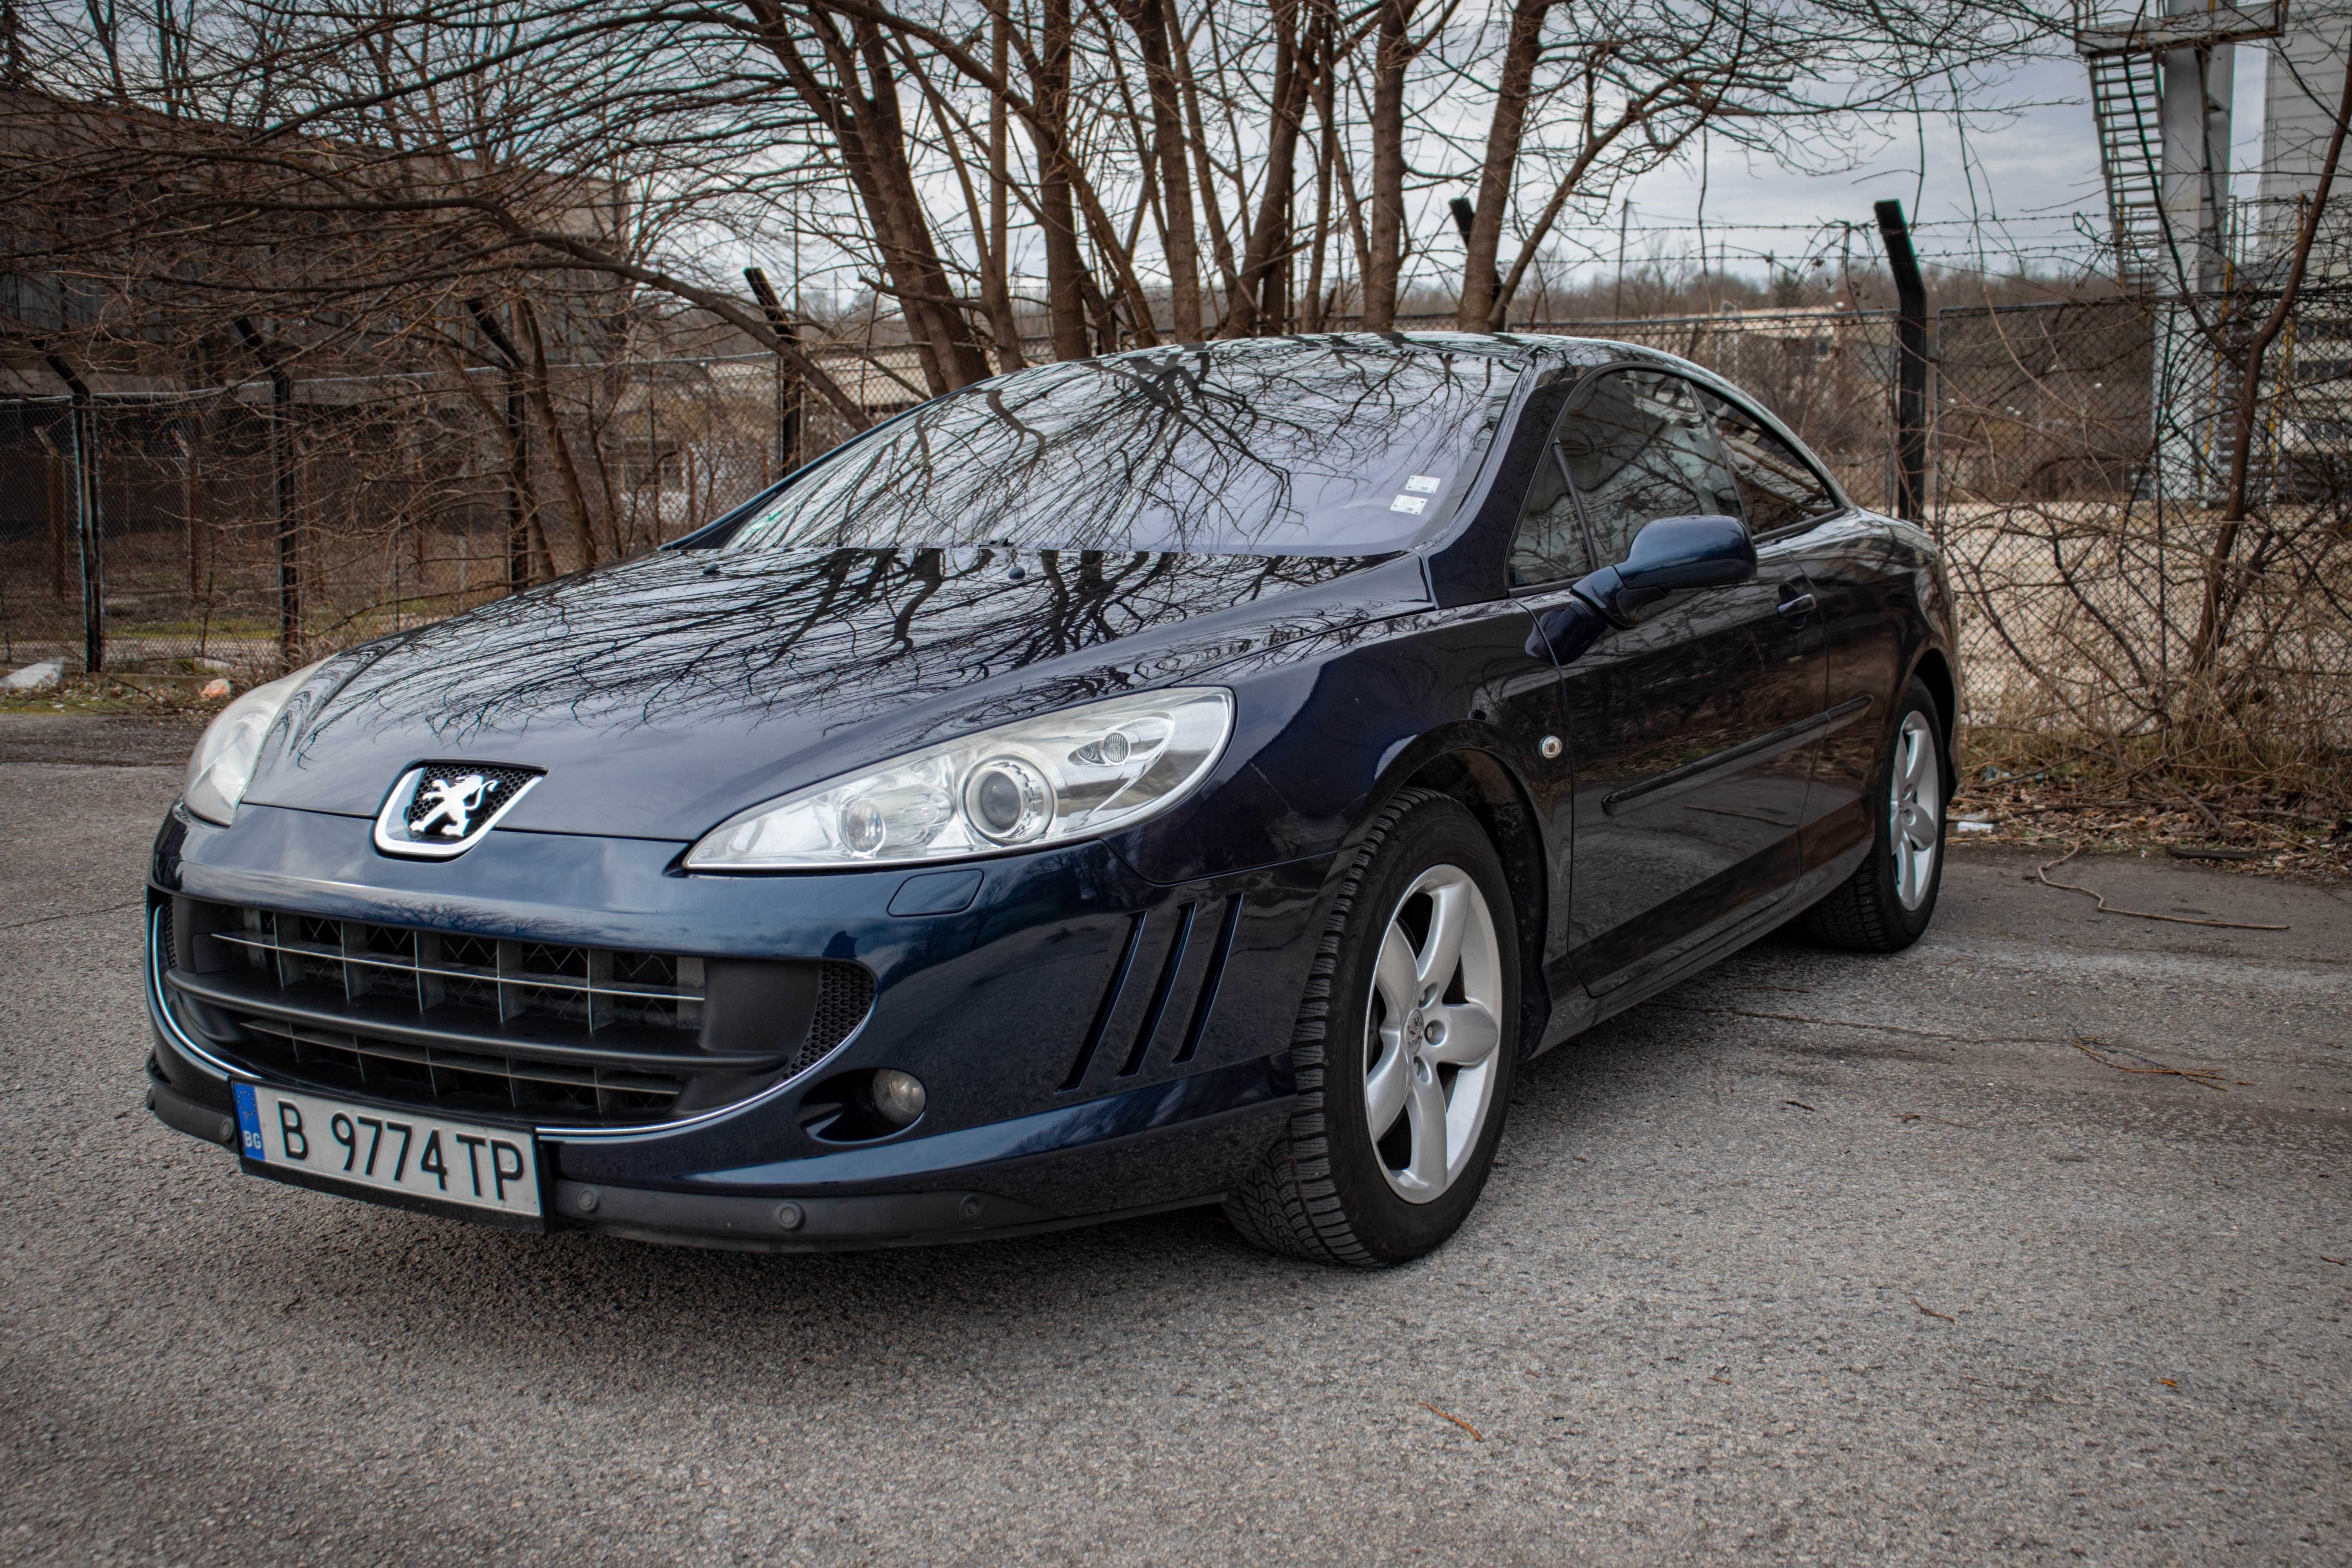 Peugeot 407 coupe